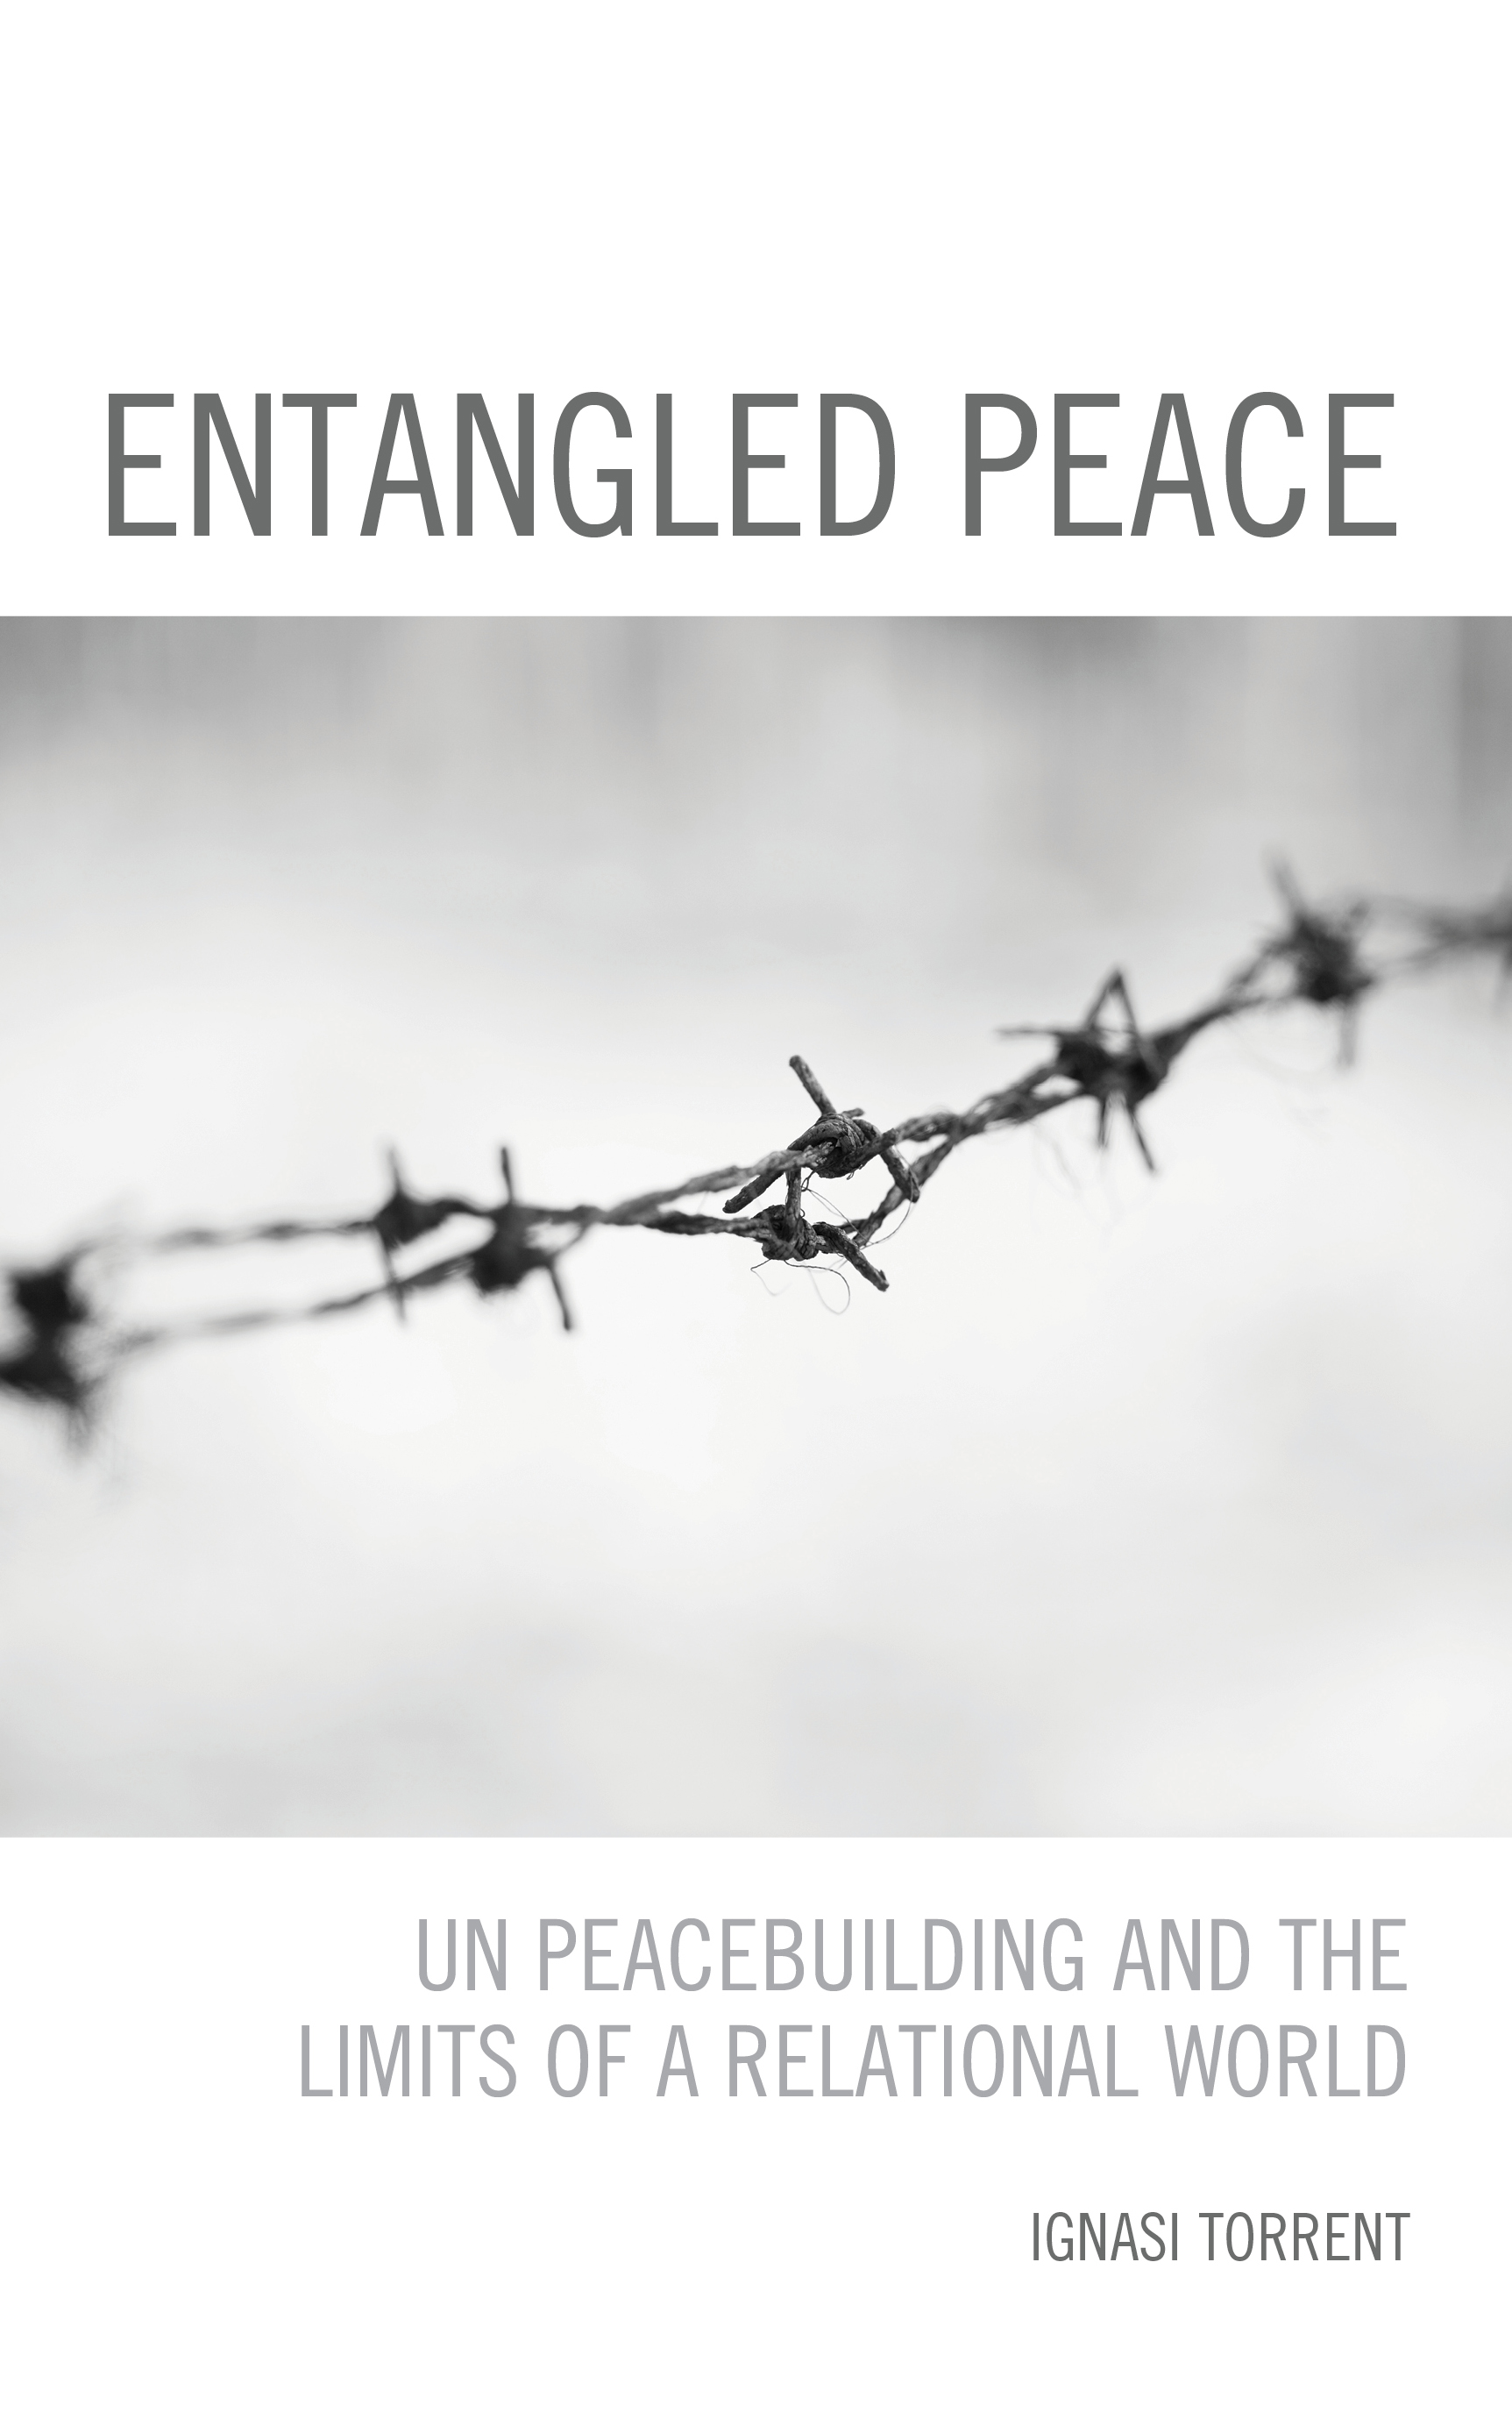 Entangled Peace: UN Peacebuilding and the Limits of a Relational World